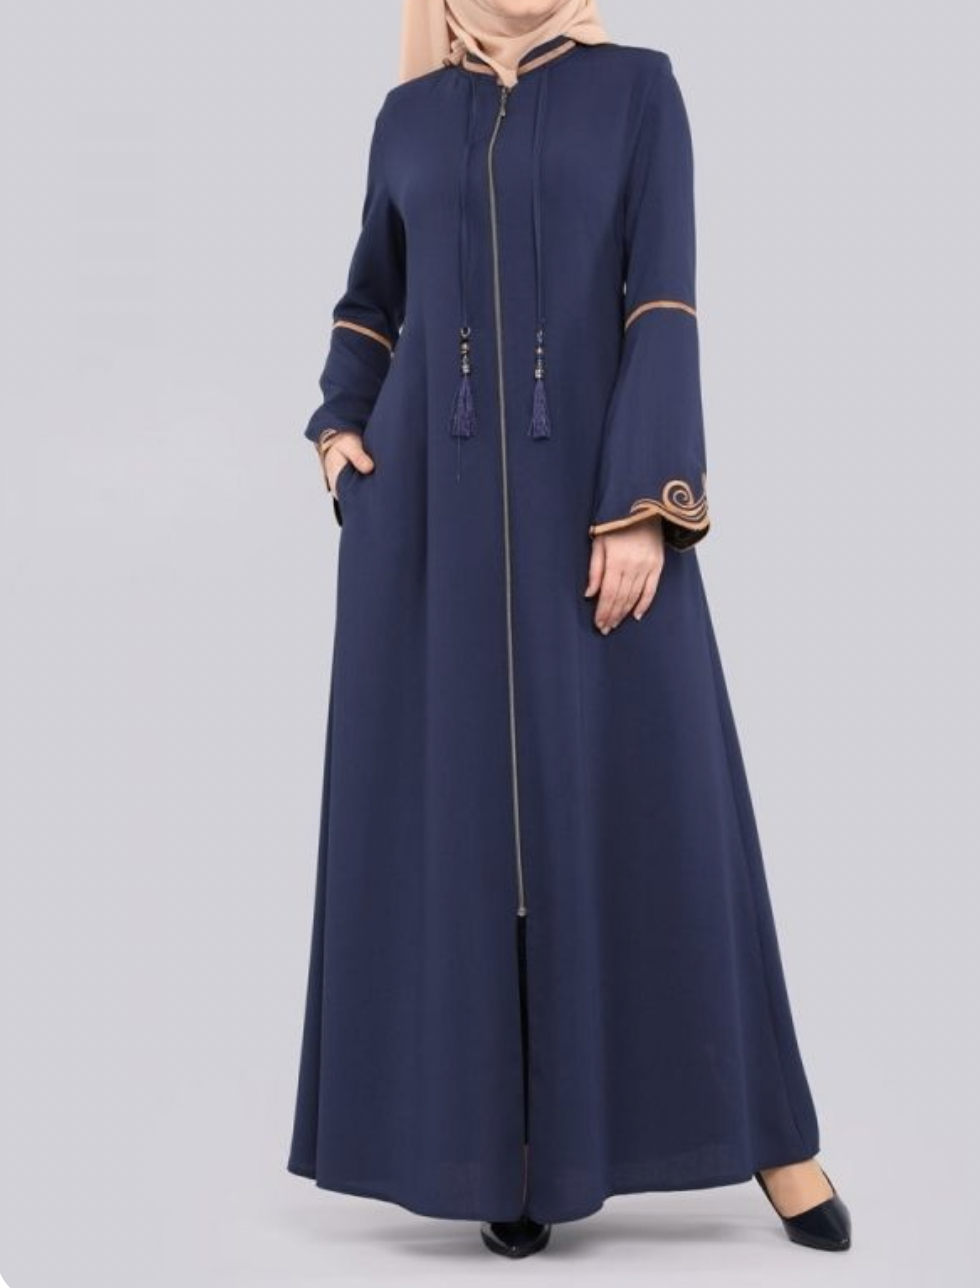 Abaya for women: how to choose the right one?